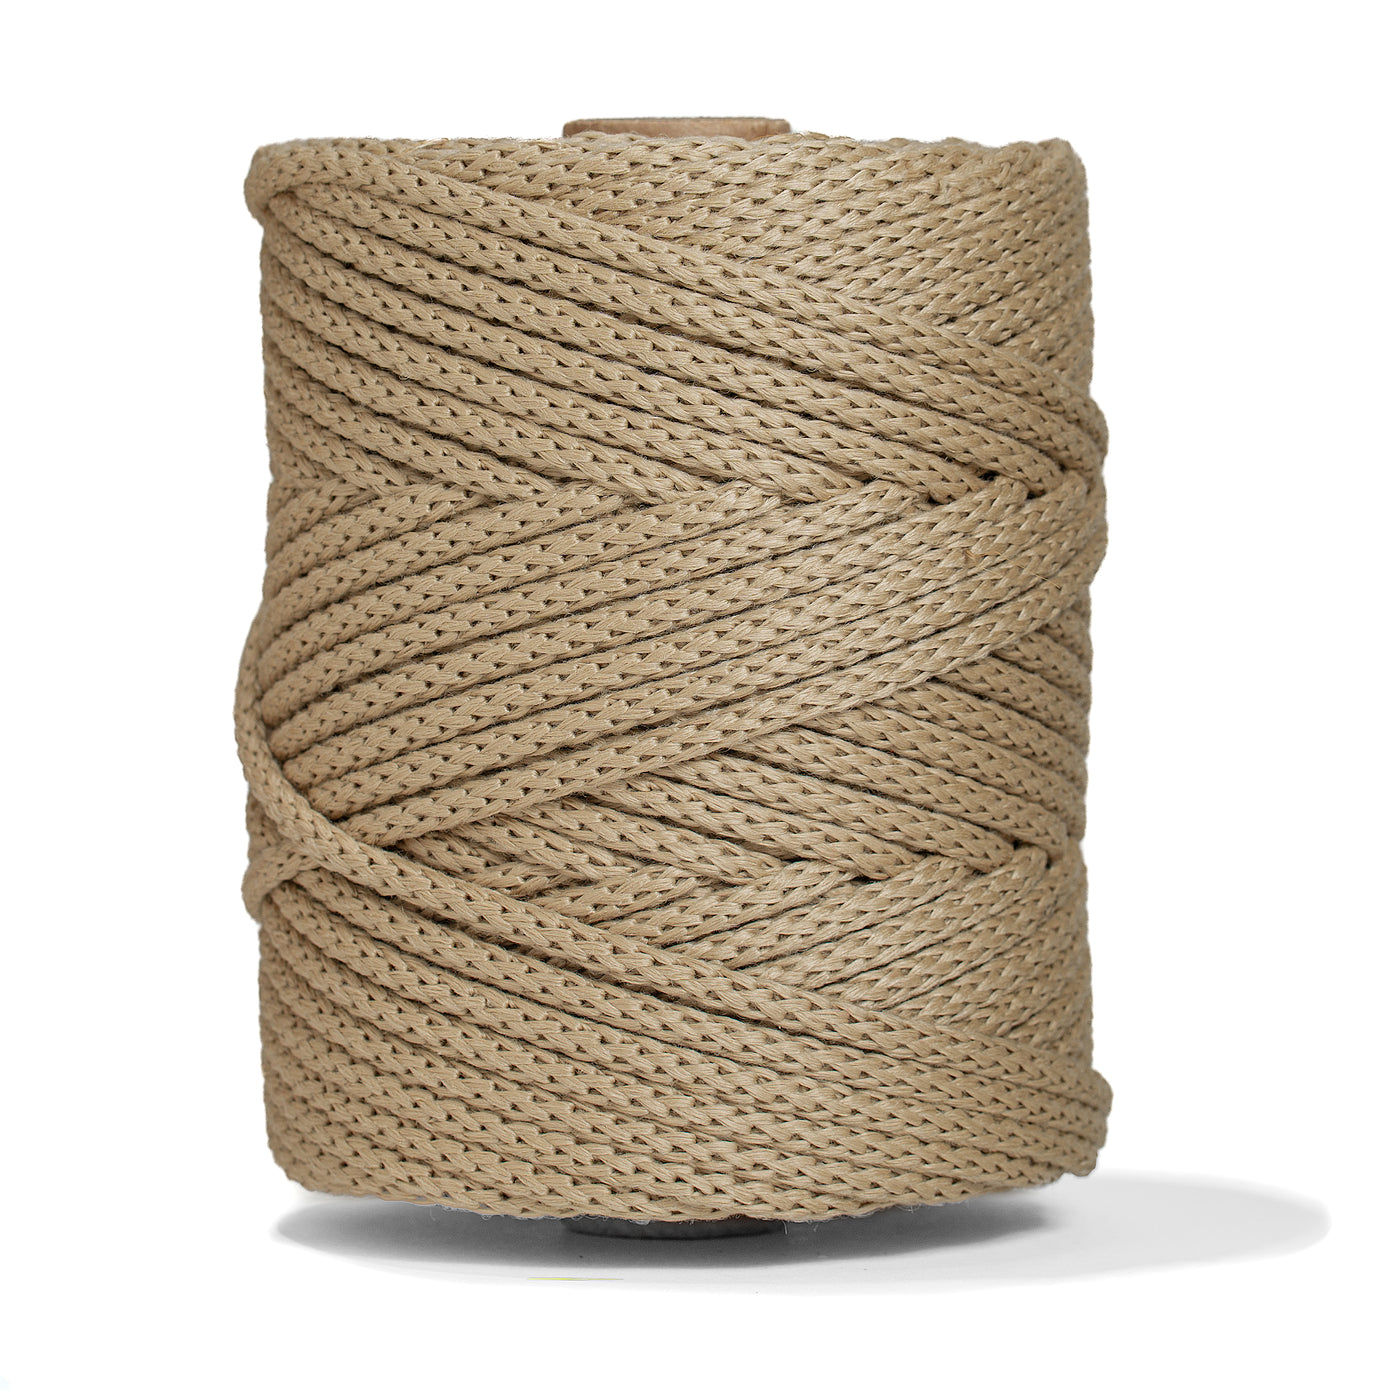 OUTDOOR RECYCLED BRAIDED CORD 6 MM -  SAND COLOR